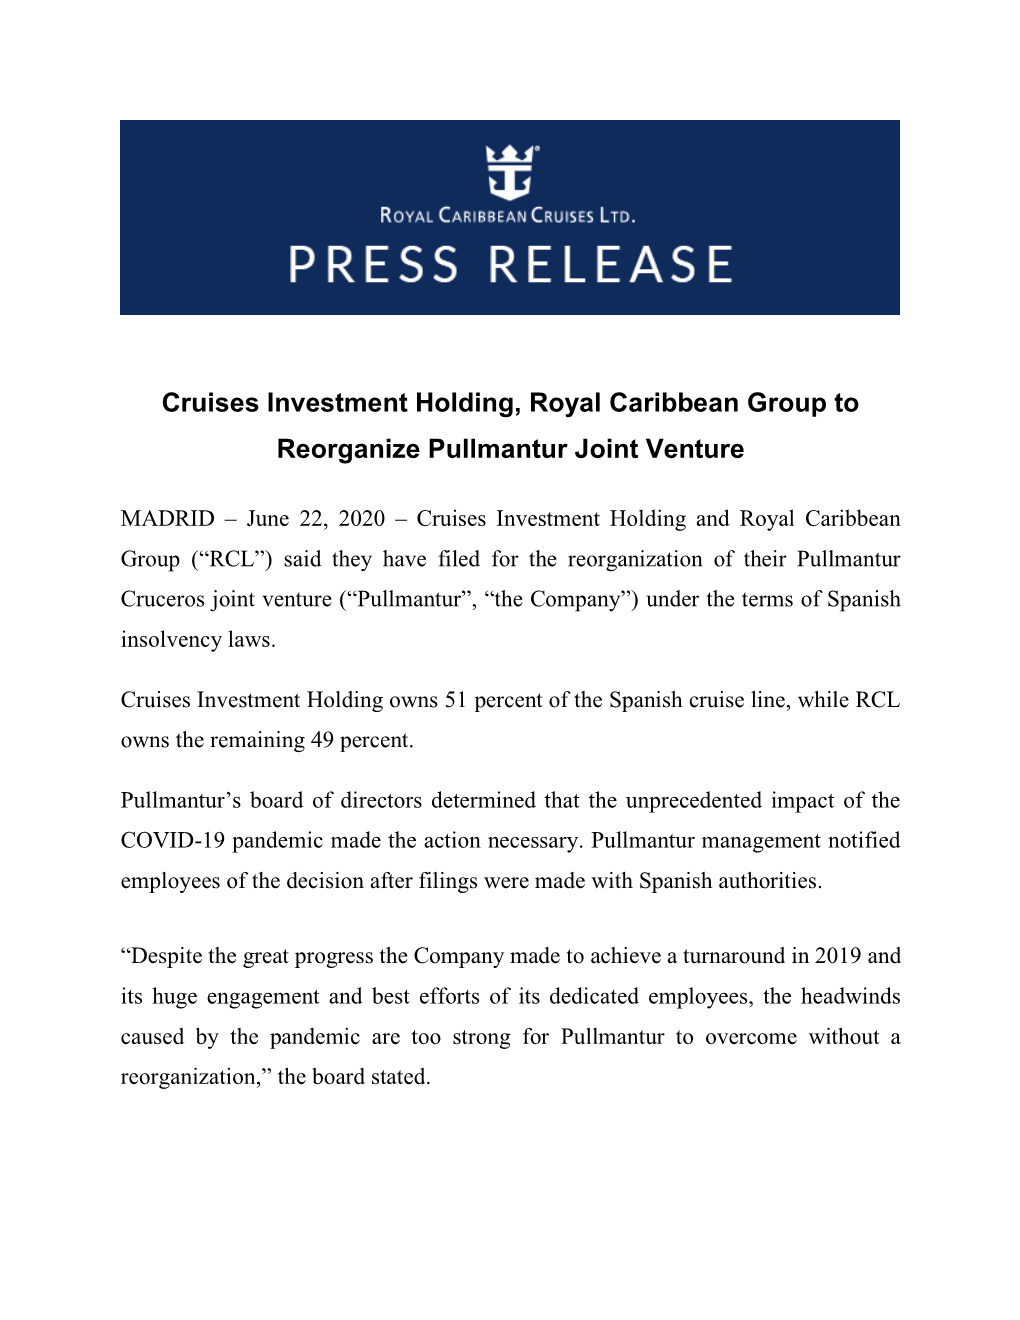 Cruises Investment Holding, Royal Caribbean Group to Reorganize Pullmantur Joint Venture